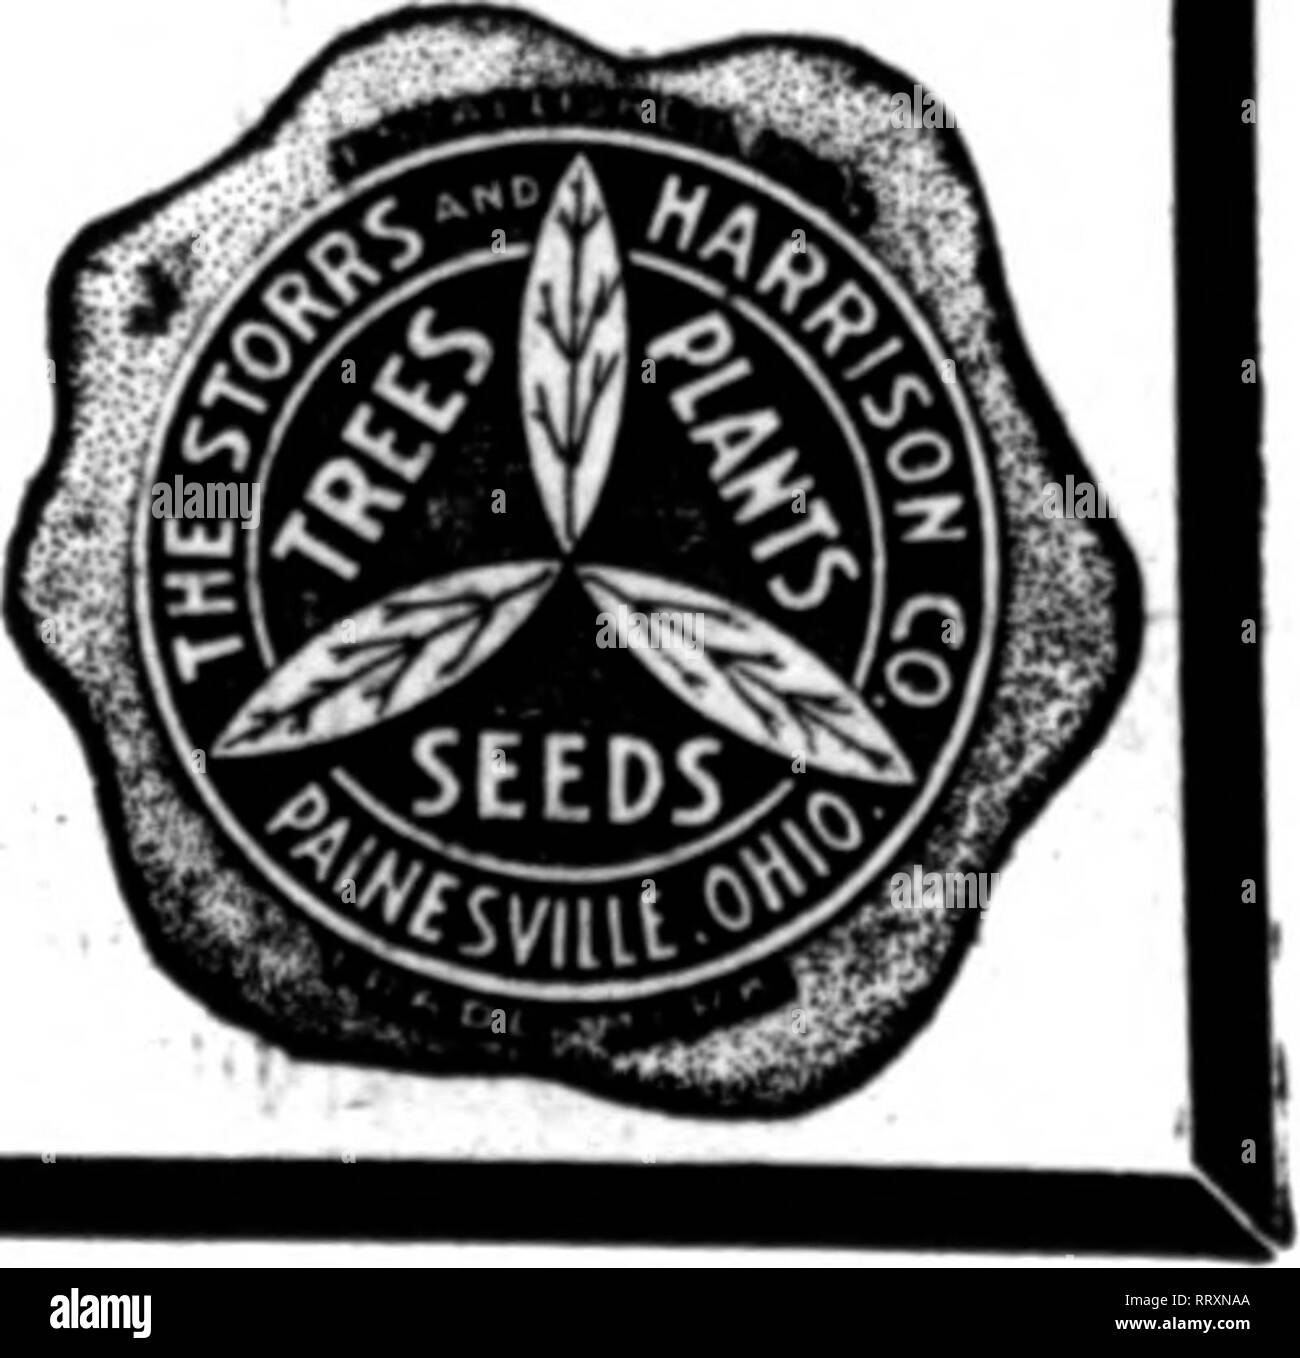 . Florists' review [microform]. Floriculture. &quot;Superl/* Quality&quot; SEEDS FOR fLORISTS THE STORRS &amp; HARRISON CO.'S SUPERB MIXTURE OF GIANT PANSY SEED ContalDB the Ultimate in Oiant Pansieg. You cannot buy a better mixture of Paniy Seed at any price. Trade Packet. 30c; H oz.. $1.26: oz.. $4.00. We carry in stock all named and separate colors of Oiant Pansies, also the best strains of Odier, Cassler, Bu^not. Trimardeau, etc. (See our trade list for prices.) Cineraria Grandiflora .'J;&quot;n')rtirdVp&quot;kI&quot;/;ro&quot;i BelliS Perennis (English Daisy) Longfellow (red). Snowball ( Stock Photo